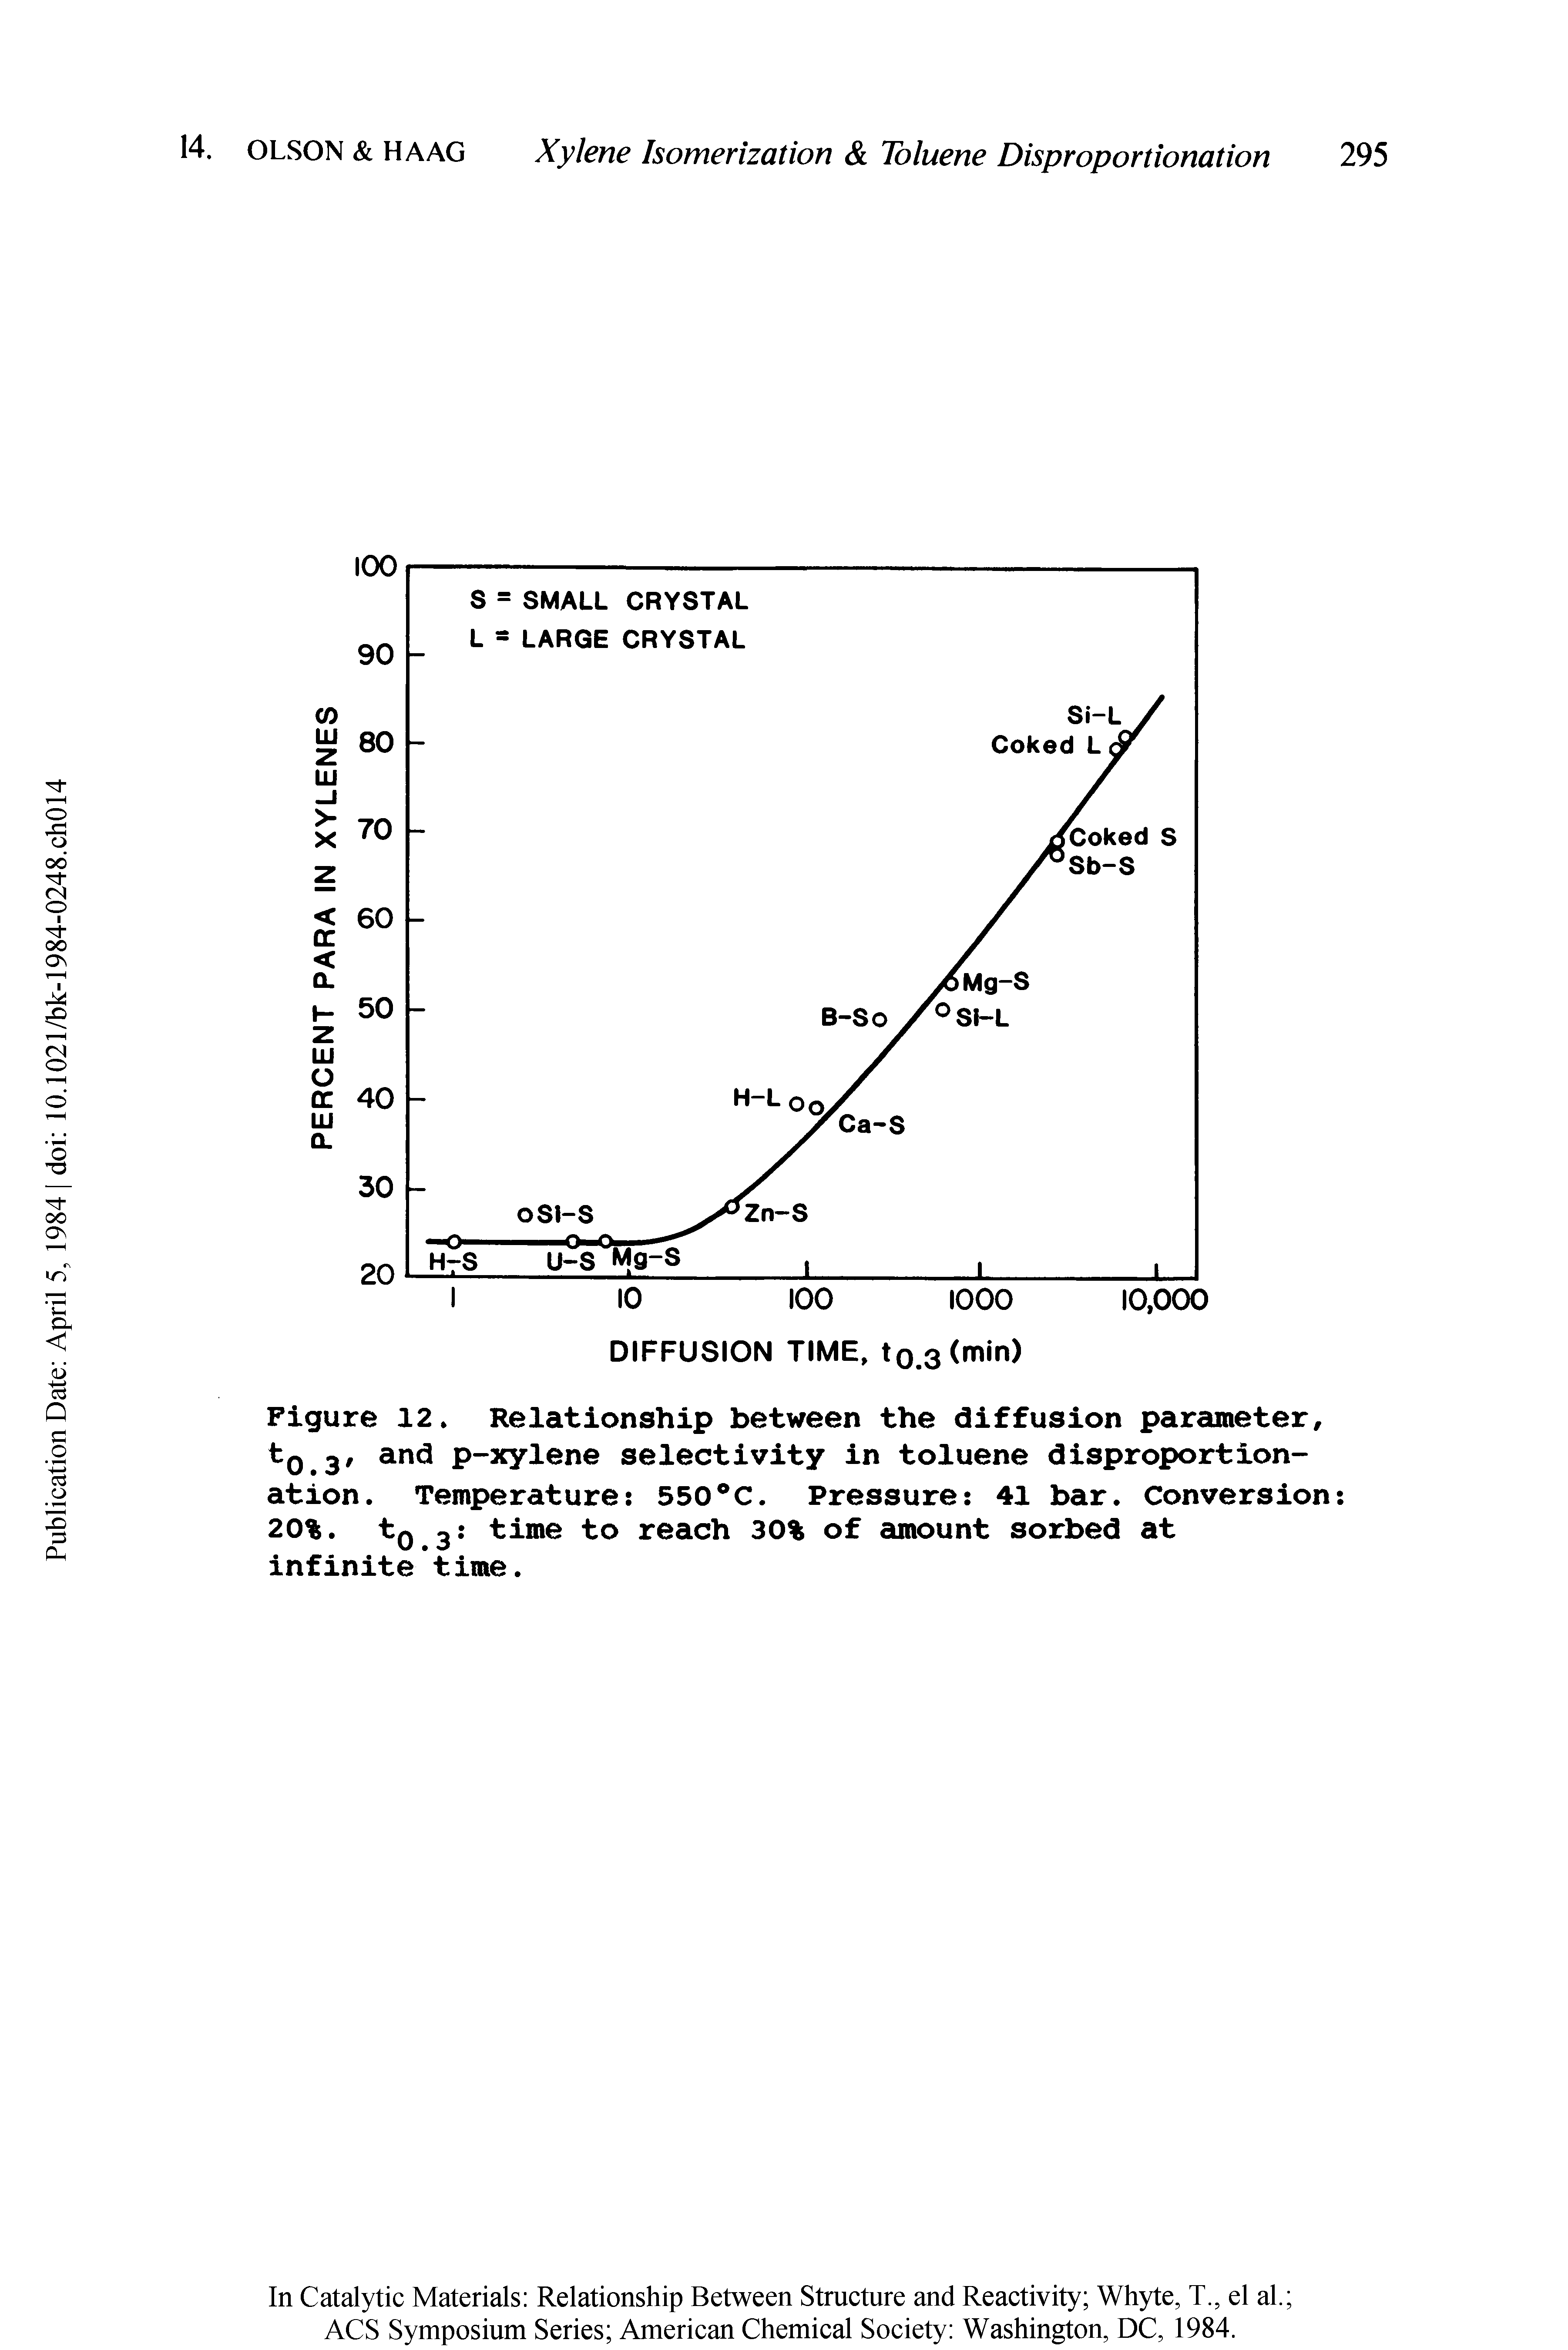 Figure 12 Relationship between the diffusion parameter, to.3 and p-xylene selectivity in toluene disproportionation. Temperature 550°C. Pressure 41 bar. Conversion 20%. tQ 3 time to reach 30% of amount sorbed at infinite time.